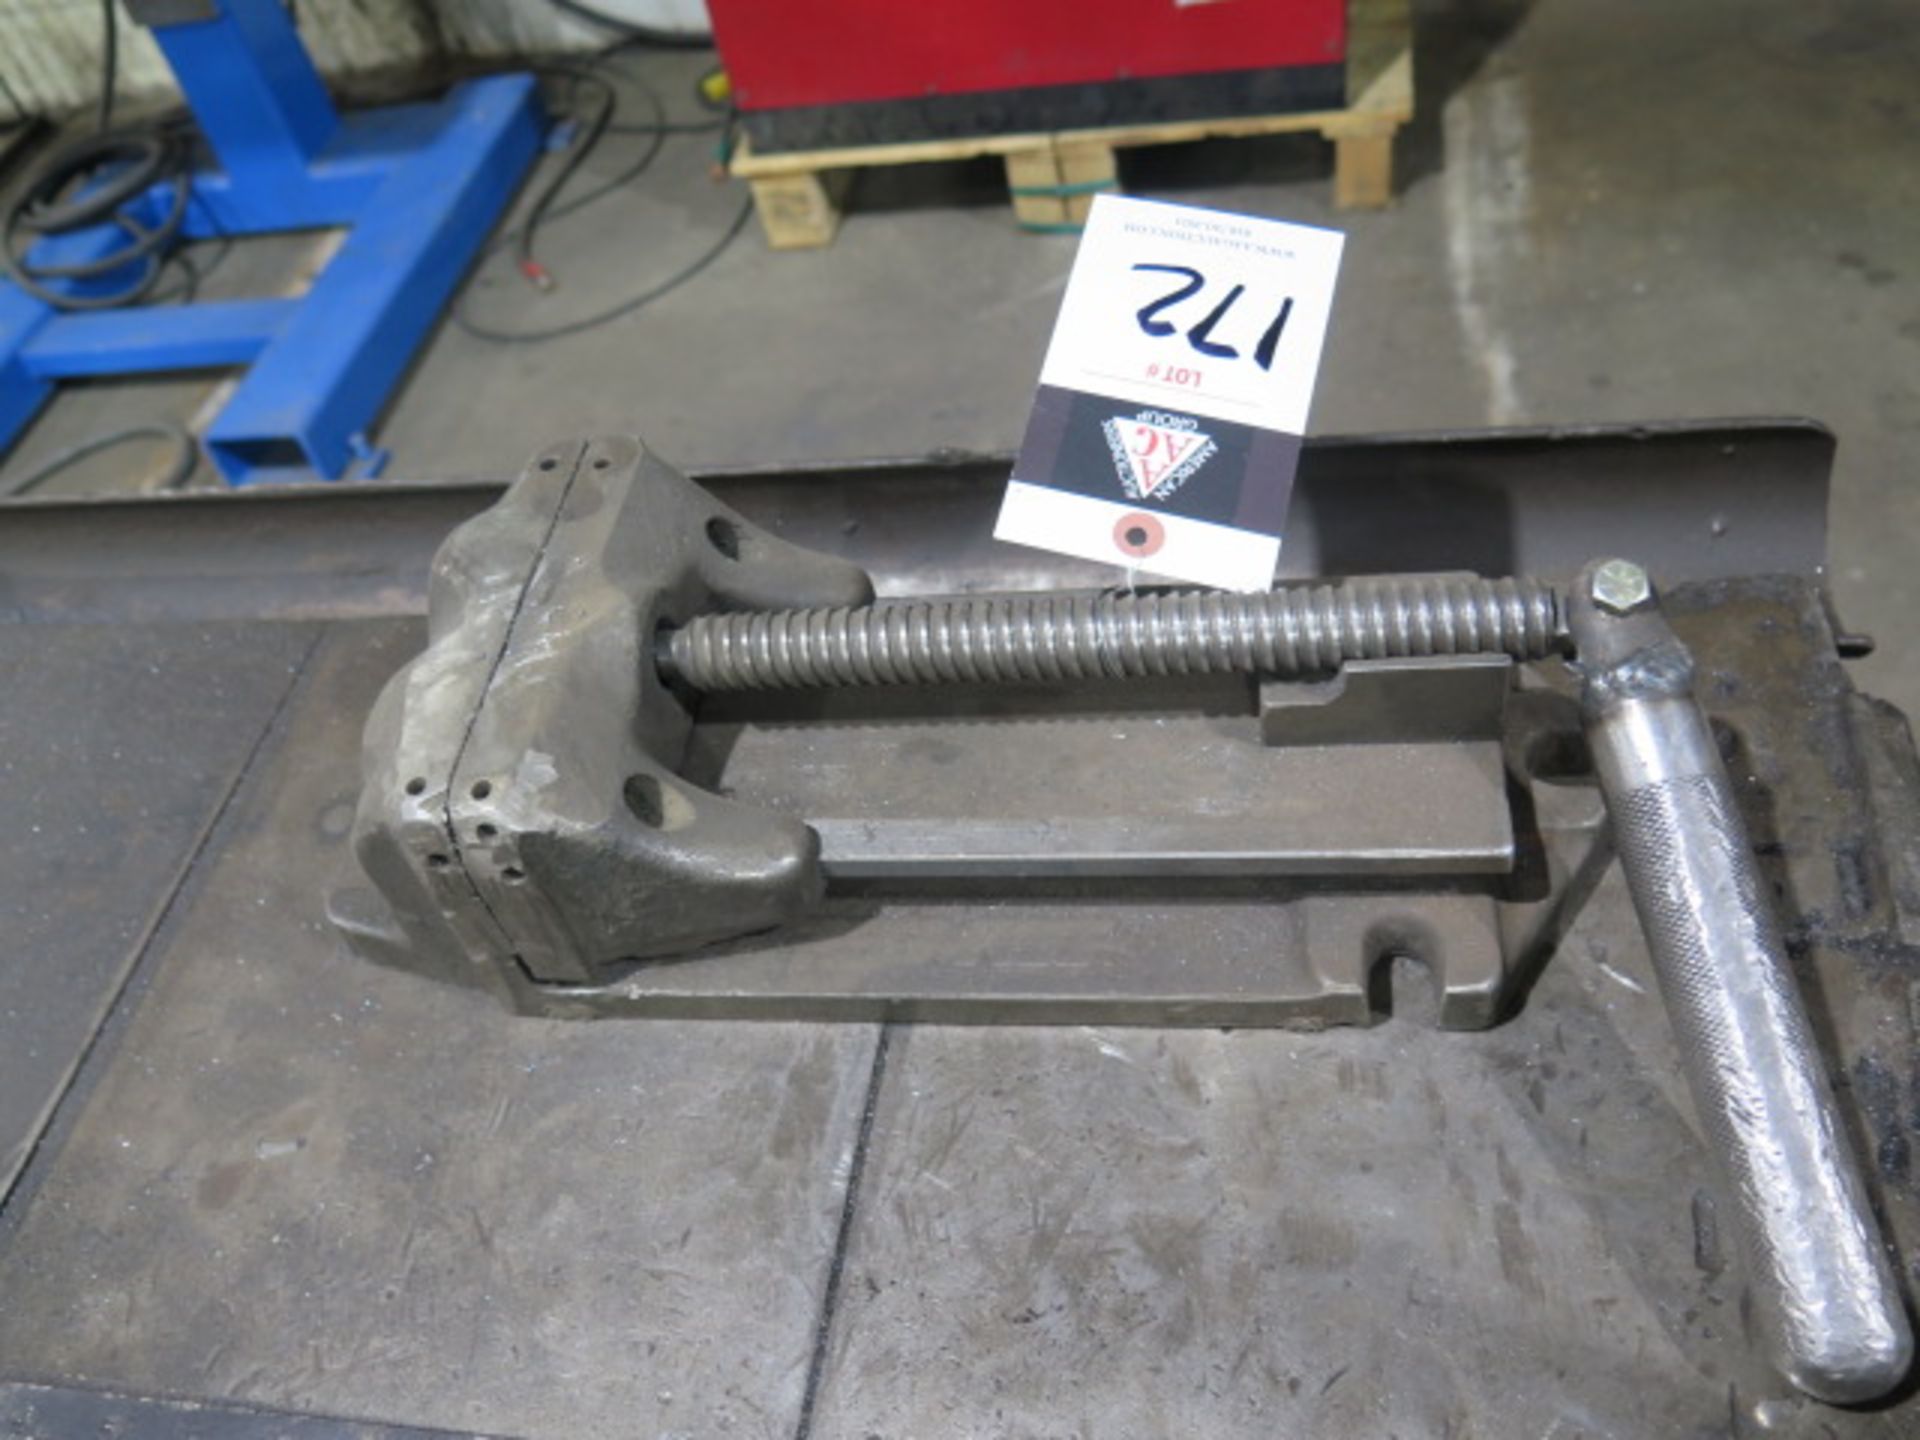 6" Speed Vise (SOLD AS-IS - NO WARRANTY)